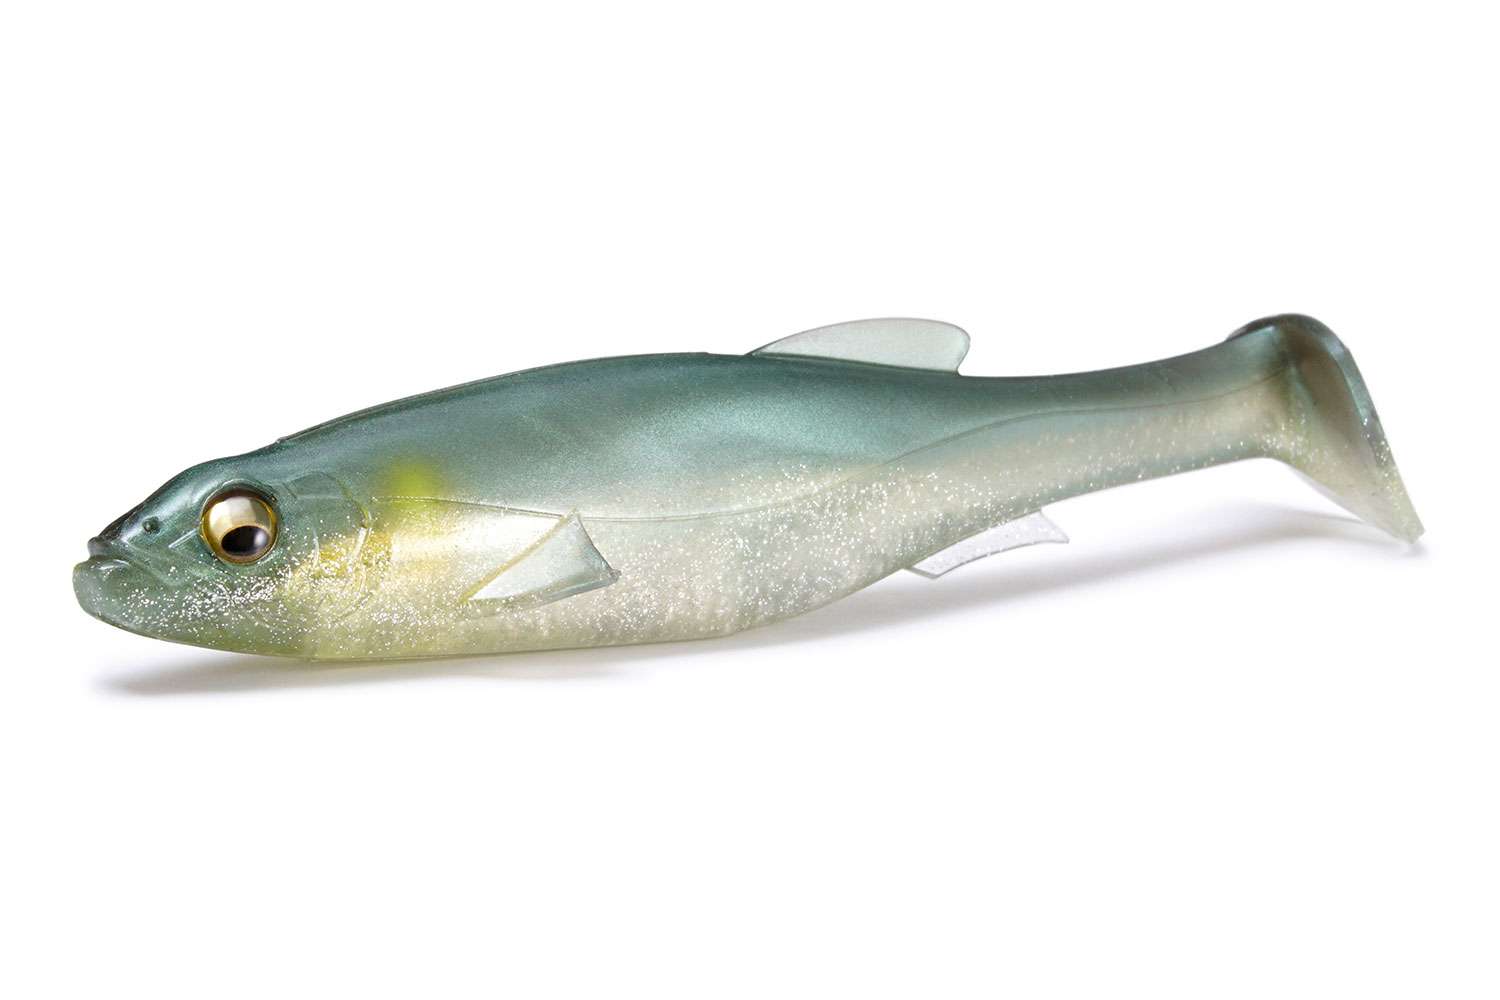  <B>Megabass Magdraft Freestyle </B><BR>
The Magdraft Freestyle features snub-nose design perfect for screw-lock hooks, a pre-cut belly and recessed top-groove, the lure is built for easy big-game rigging for novices and experts alike. Select a weighted 6/0 or 8/0 screw-lock hook to target submerged vegetation where savvy monsters lie in wait along shade lines, grass lanes and isolated cover. Switch to a heavy jighead to crawl chunk-rock, curve-fall river ledges and main lake drop-offs, and target new depths where the Magdraft has yet to roam. It measures 6 inches, weighs 1.2 ounces and comes two per pack. 